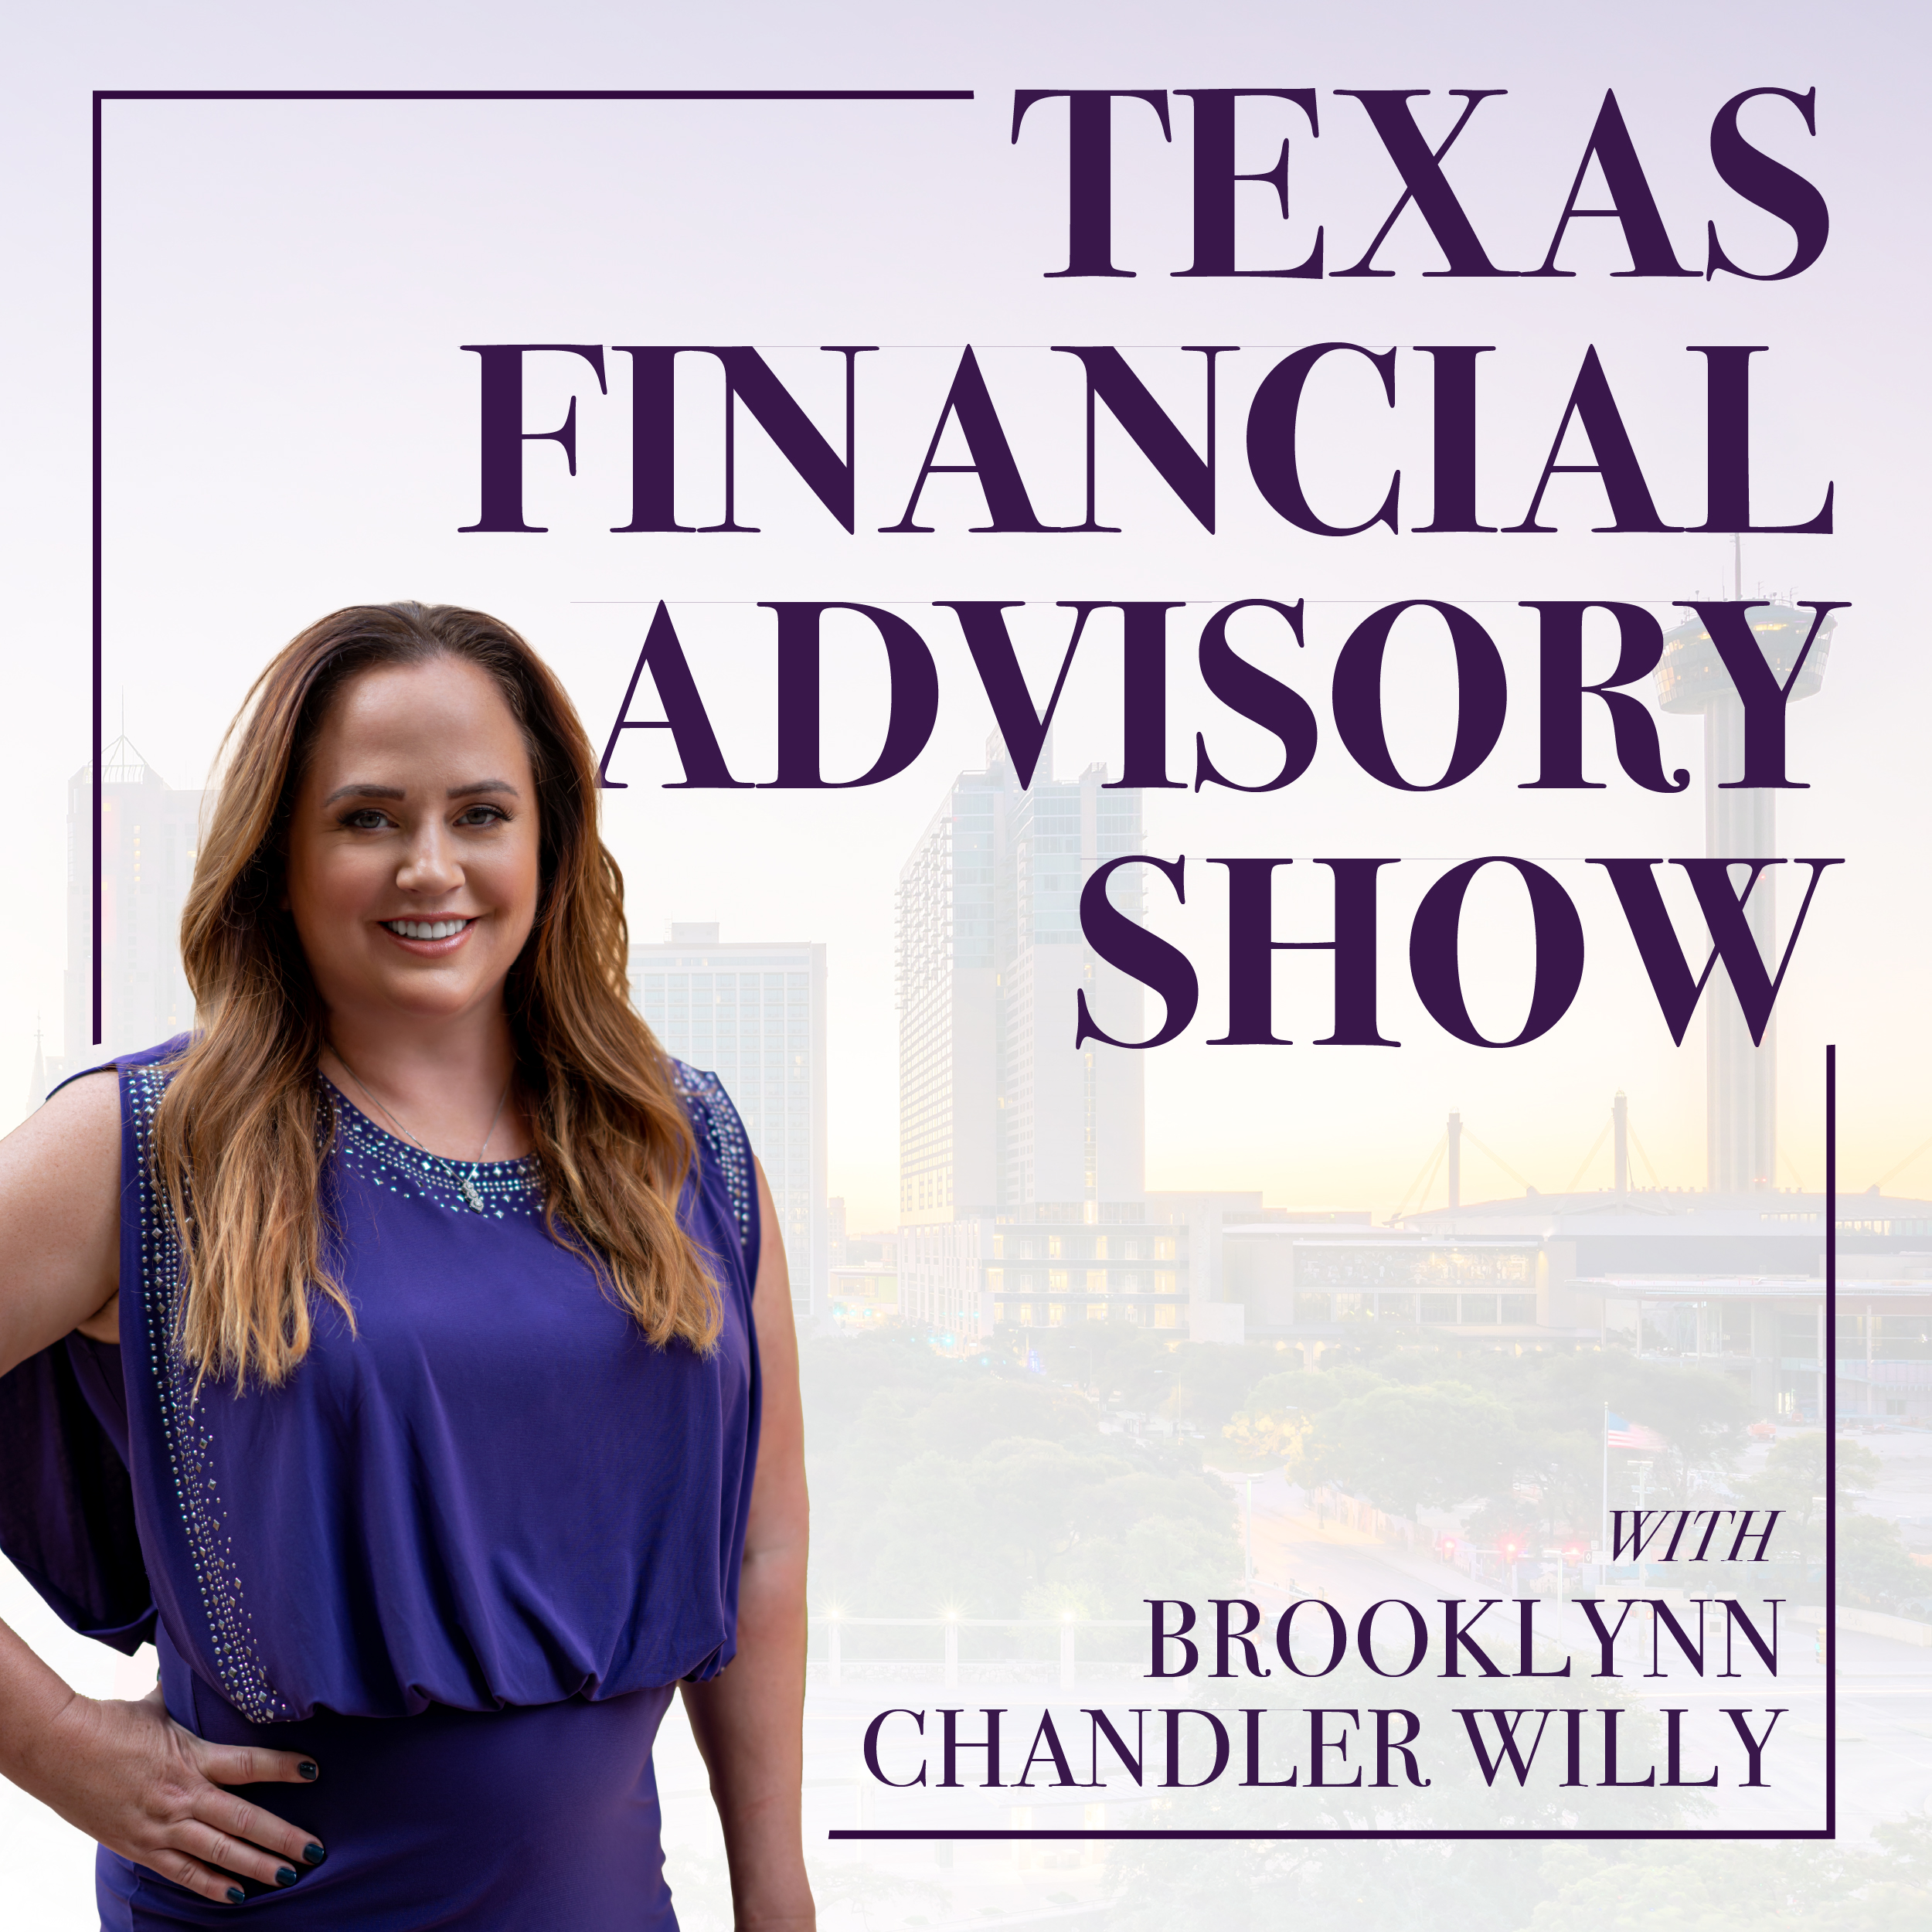 Texas Financial Advisory  If maintaining your current lifestyle is a goal of yours, stick around. On today’s show we’ll outline several ways to find the best retirement income that help you achieve your goals.